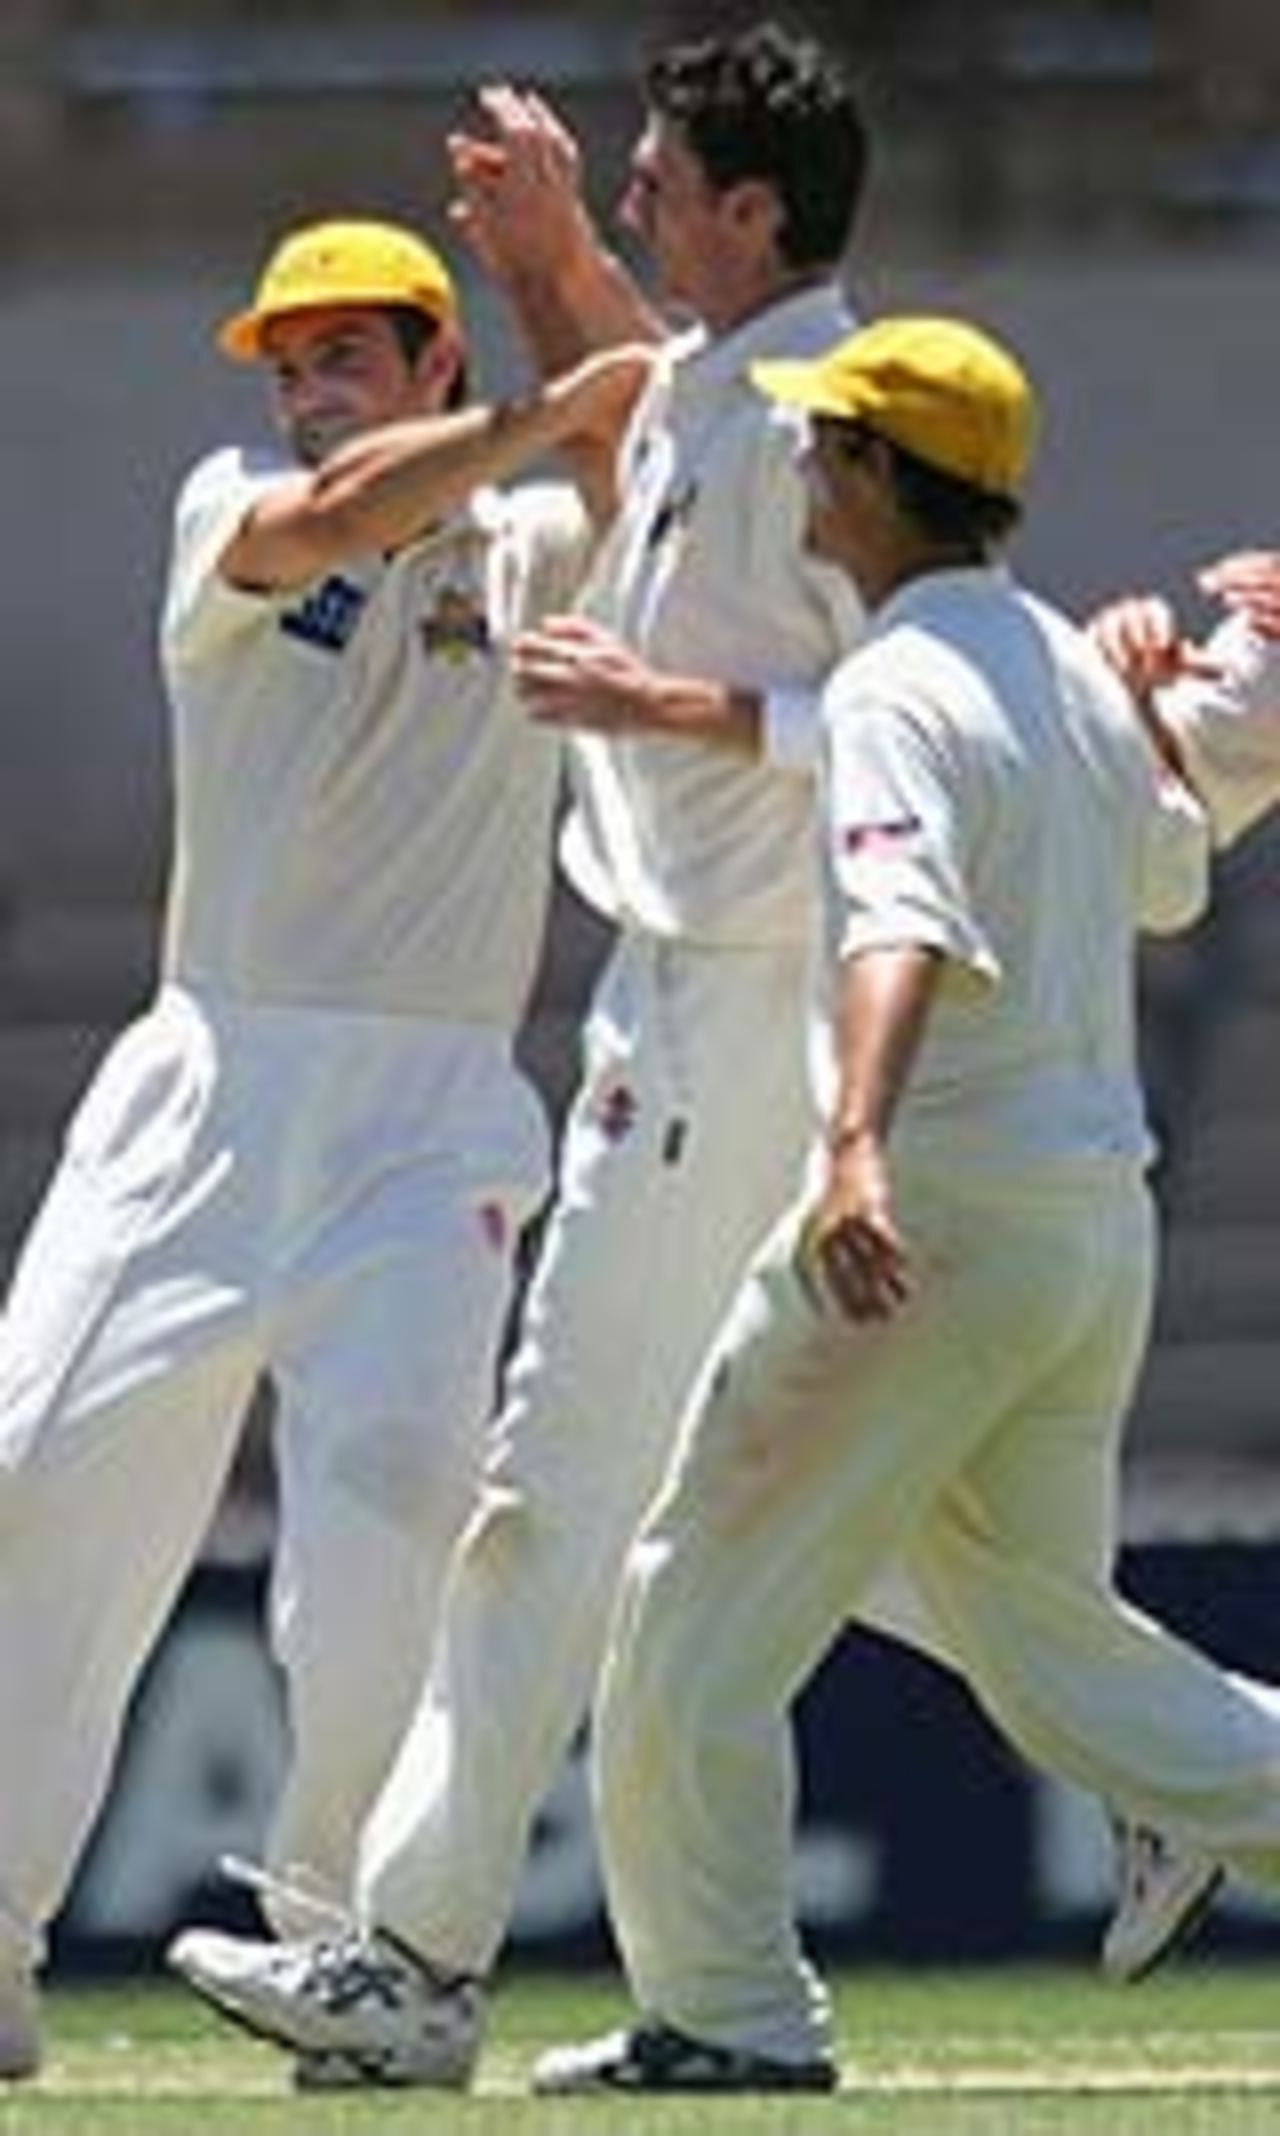 South Australia players celebrate a wicket, South Australia v Western Australia, Pura Cup, Adelaide, December 20, 2004